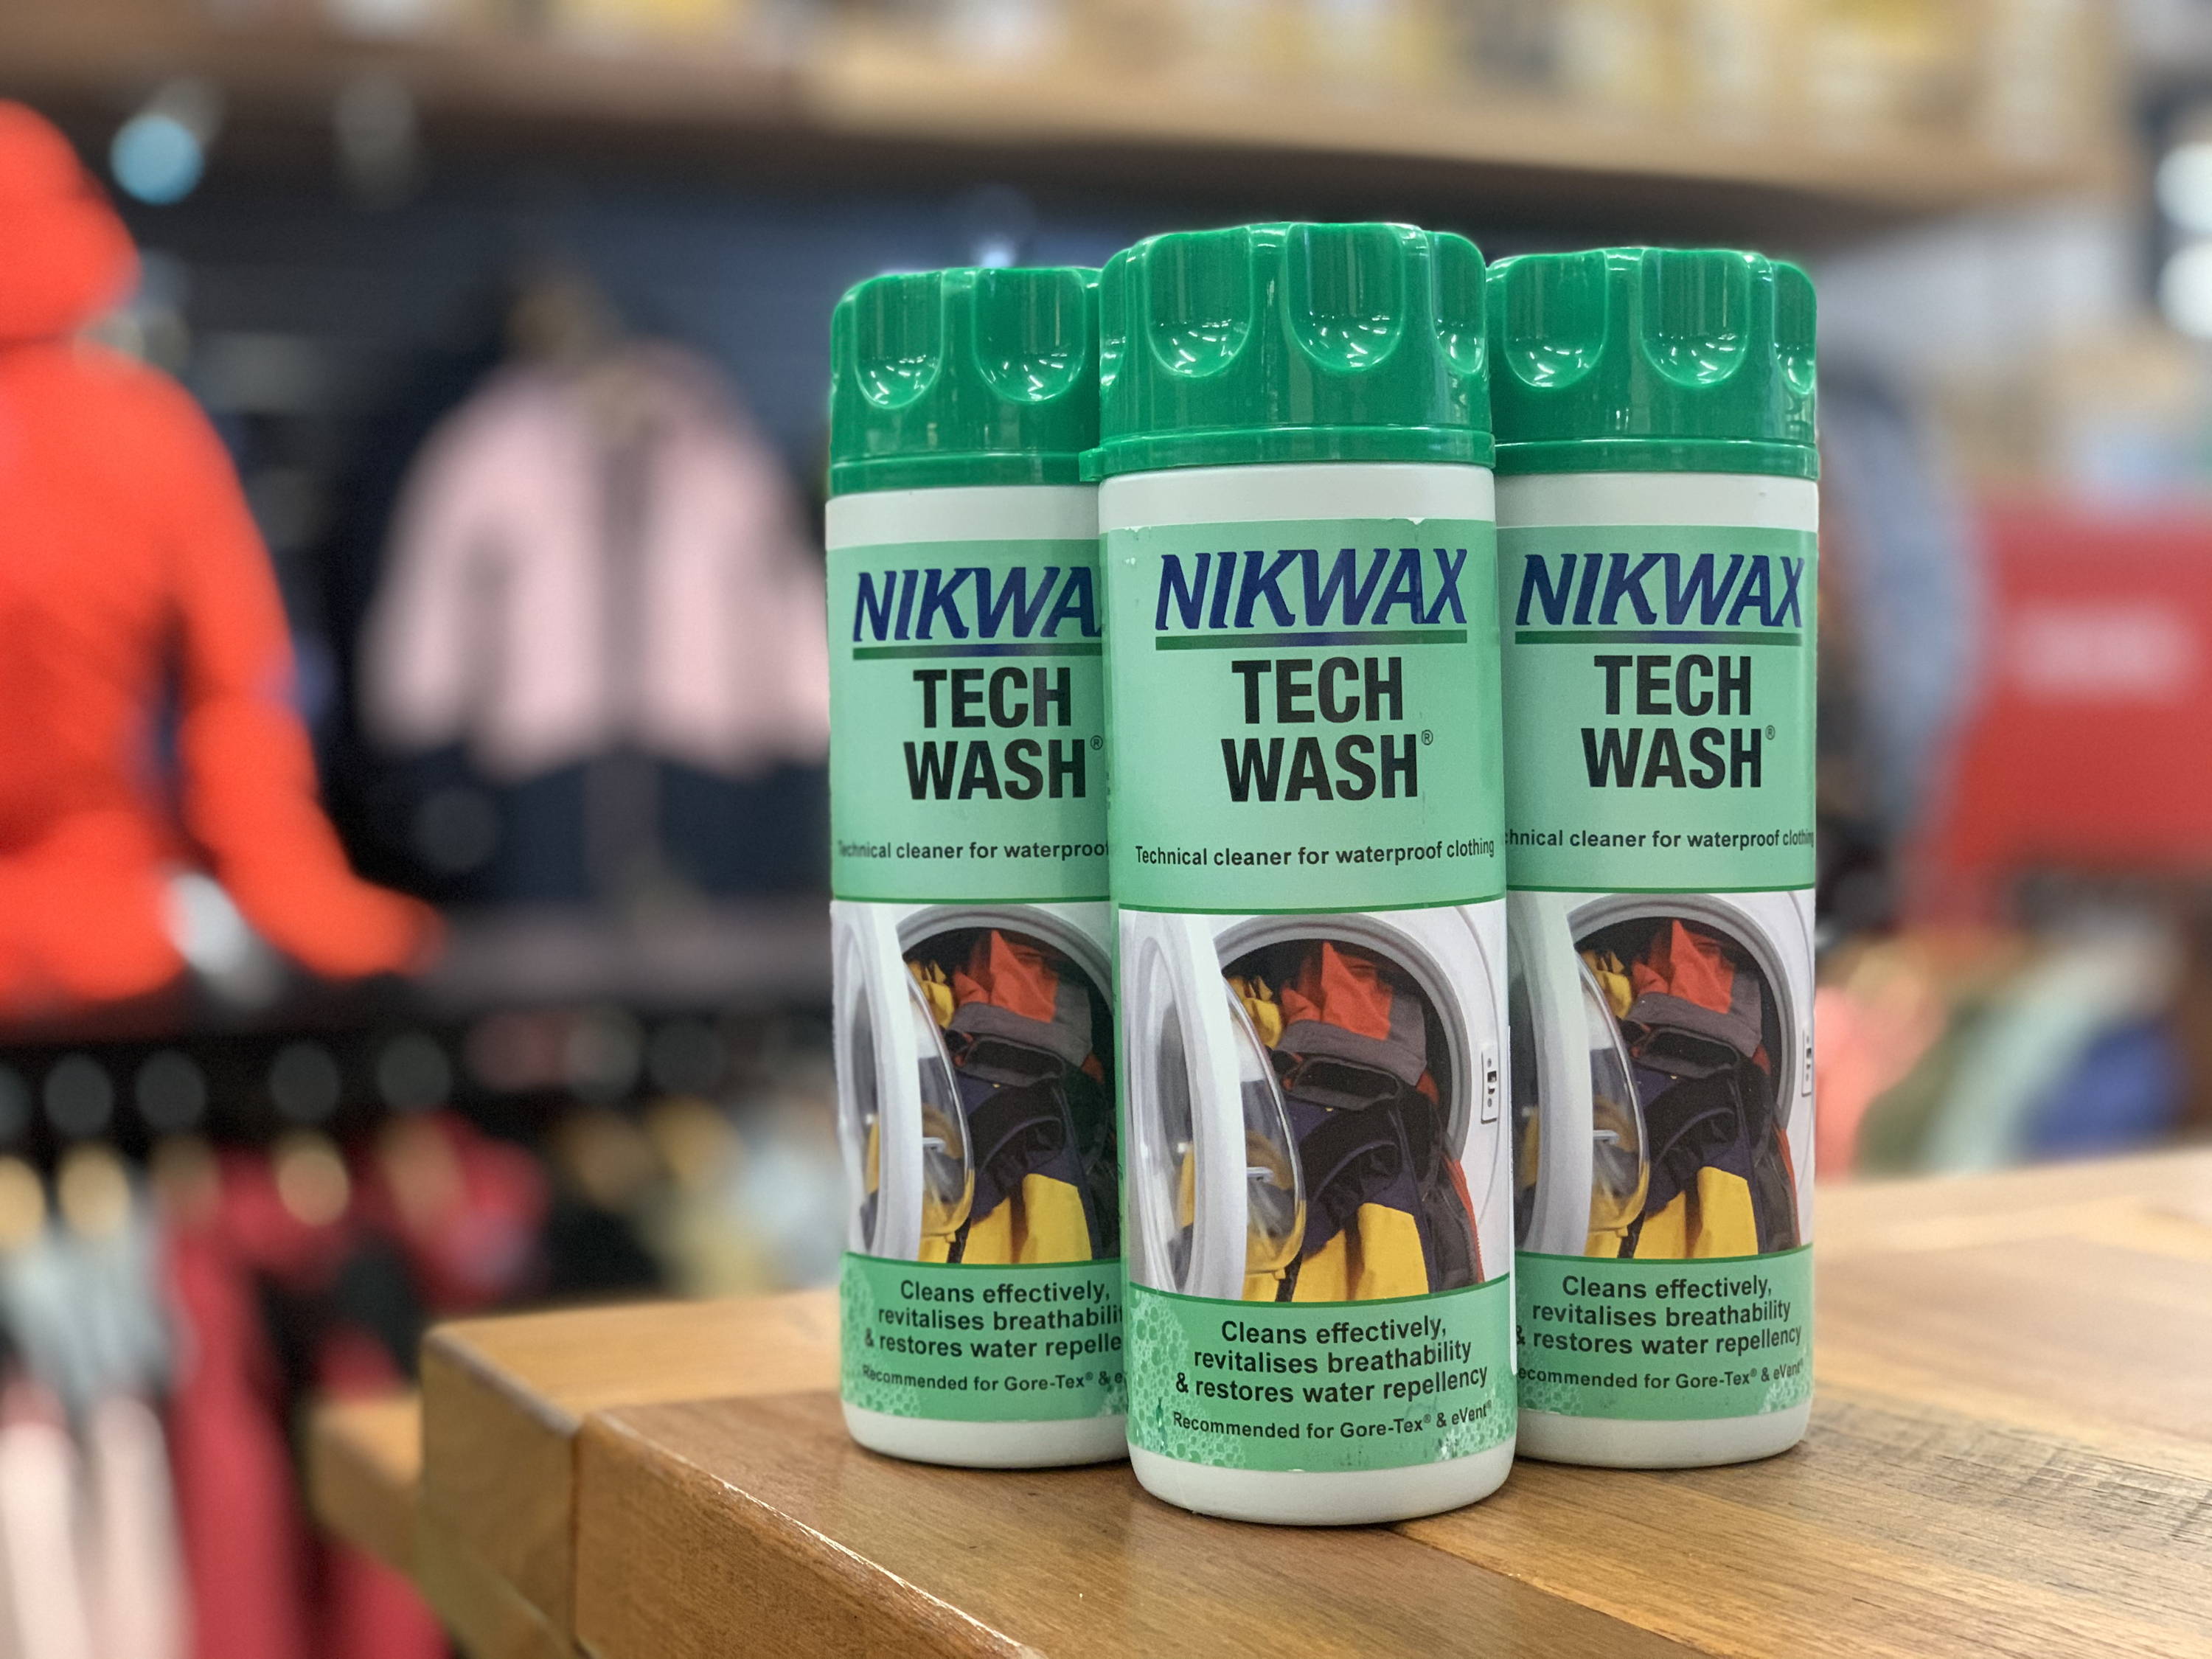 Nikwax Tech Wash Non-Detergent Cleaner for Outdoor clothing & equipment